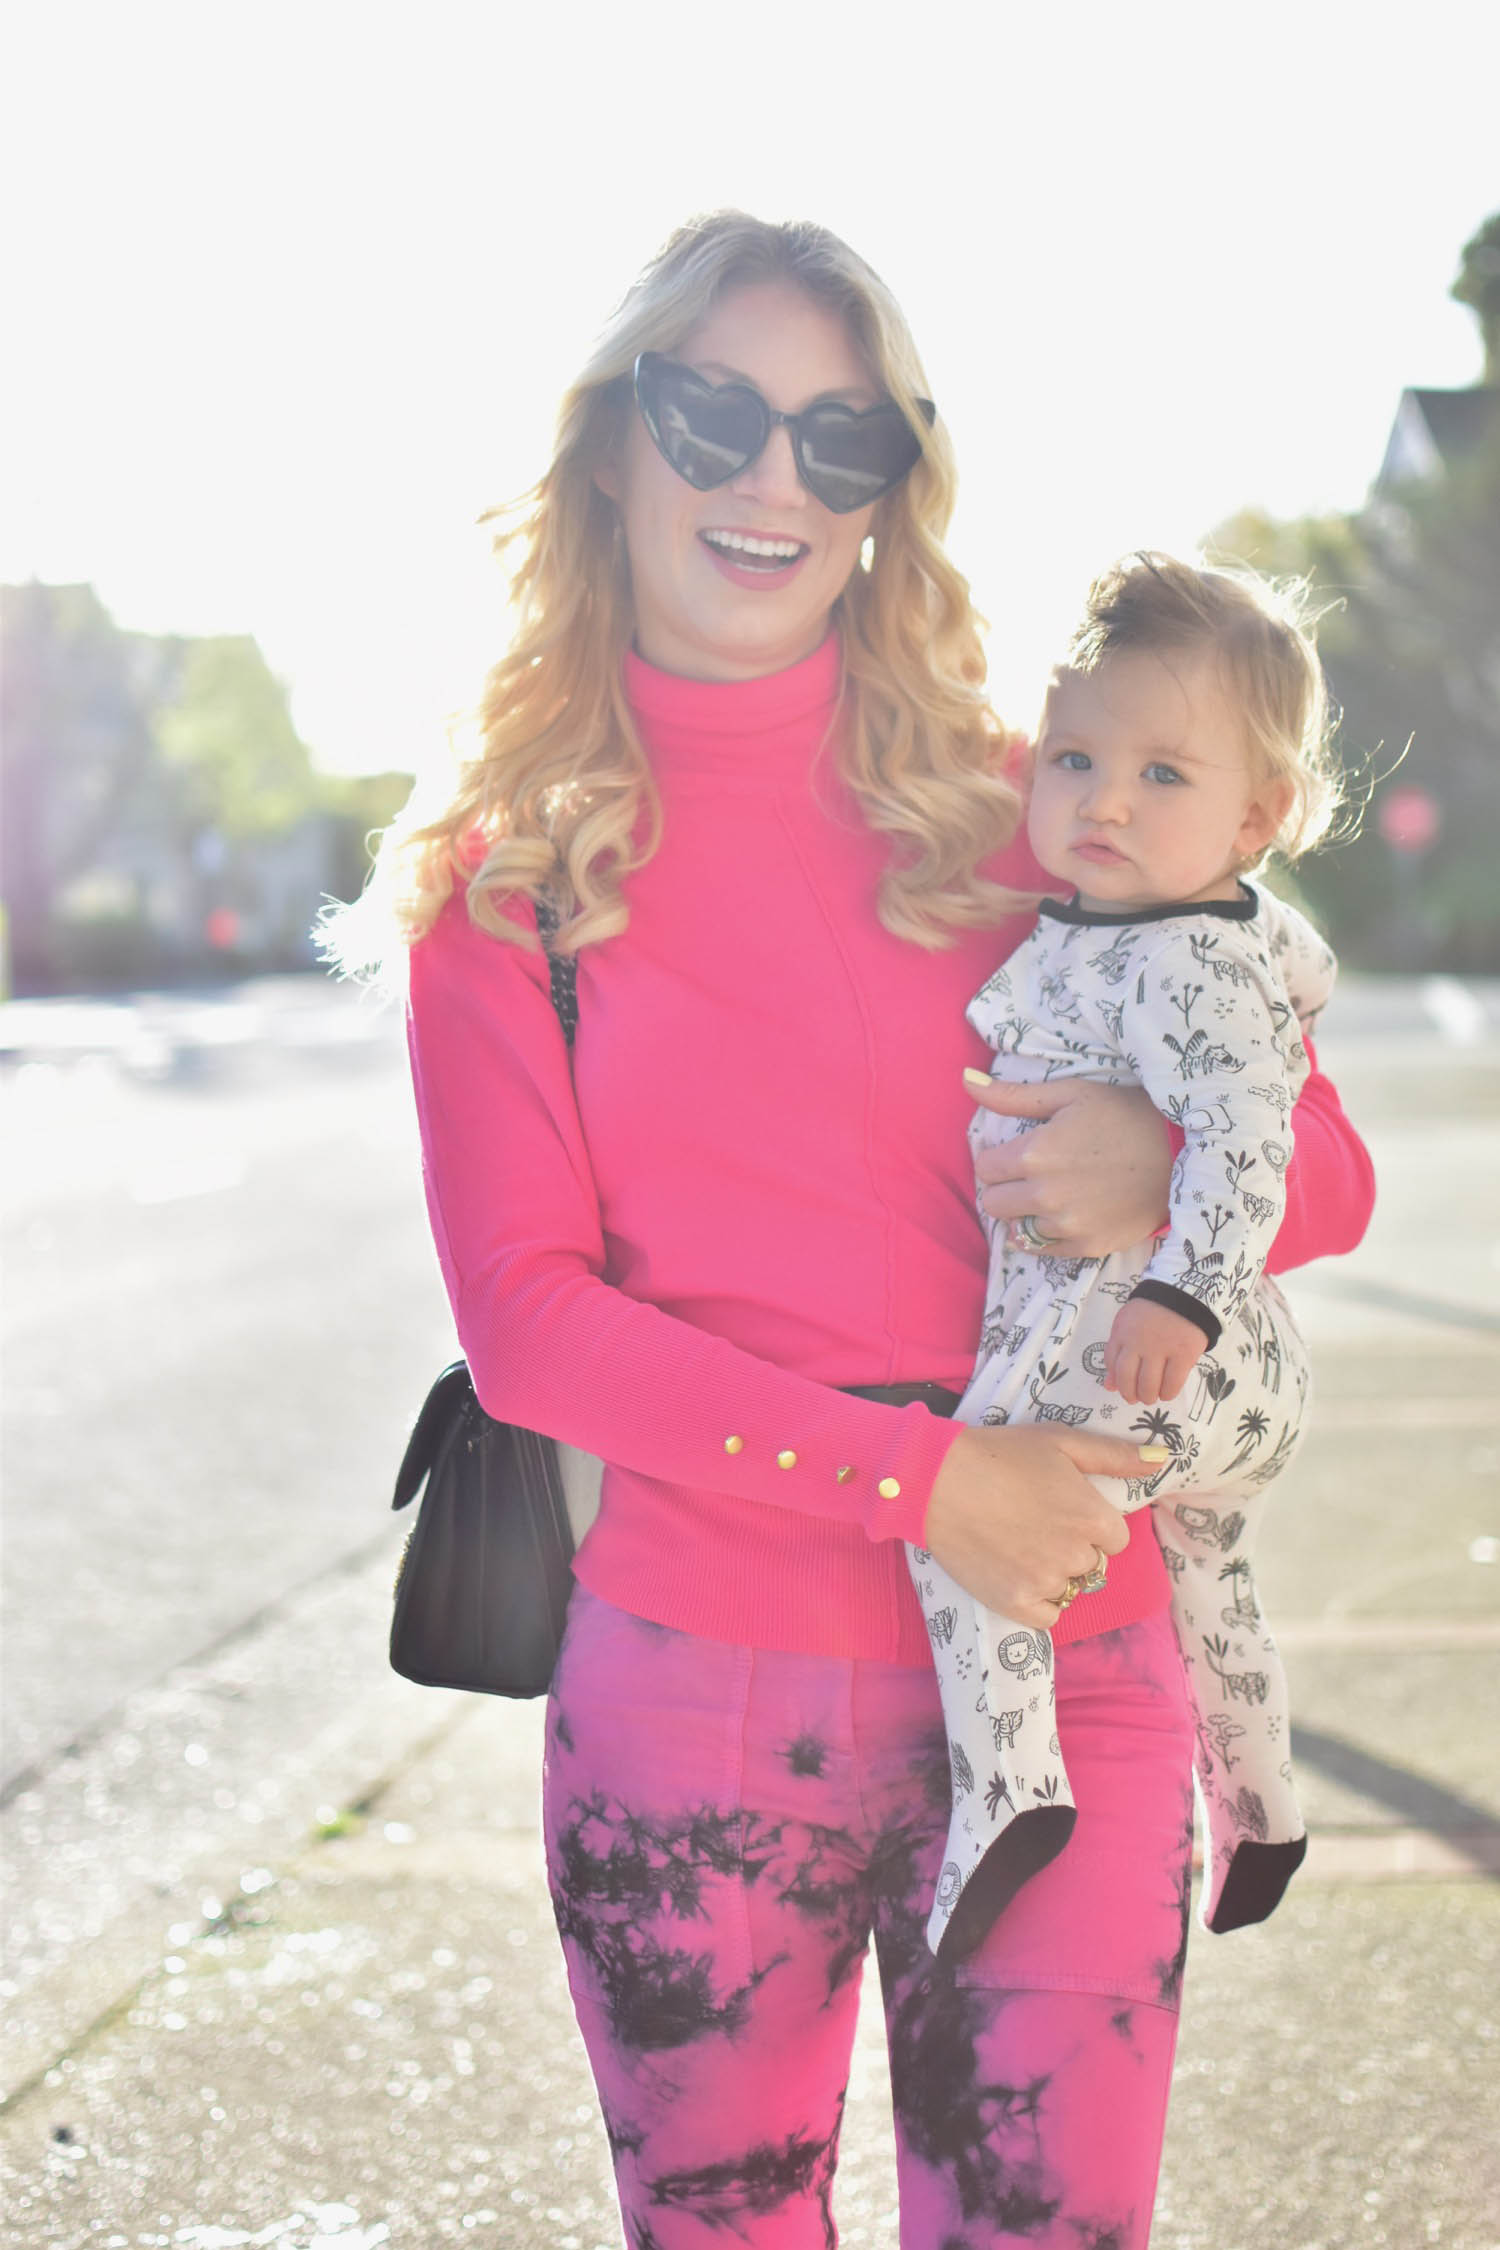 5 Things I learned in my first year of Motherhood